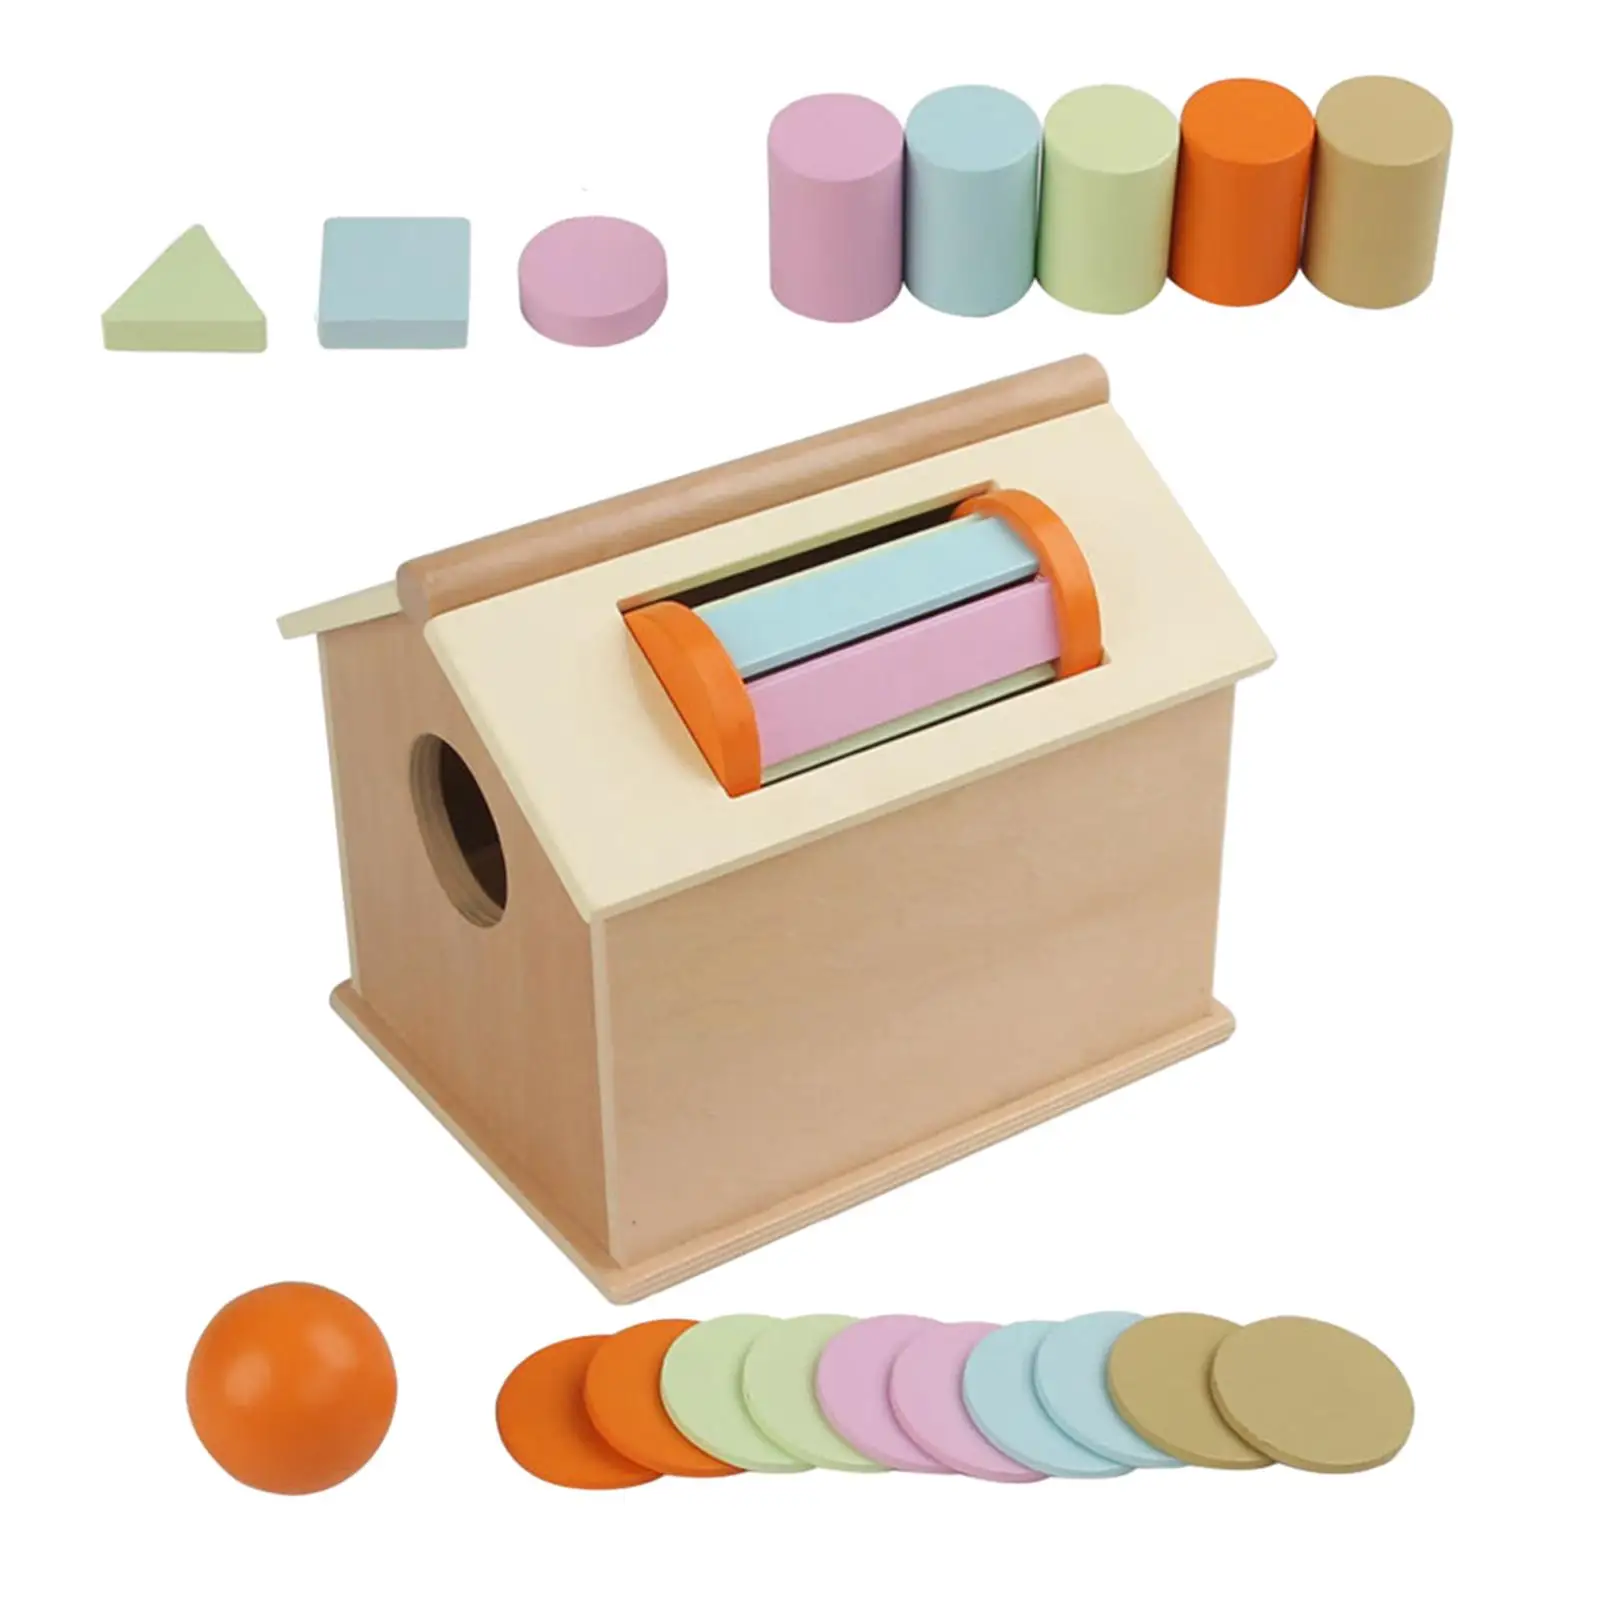 Wooden Montessori Toys Drop Box Learning Toy Wooden Toys Ball Coin Drop Toy House for 6-12 Months Baby Kids Children Girls Boys